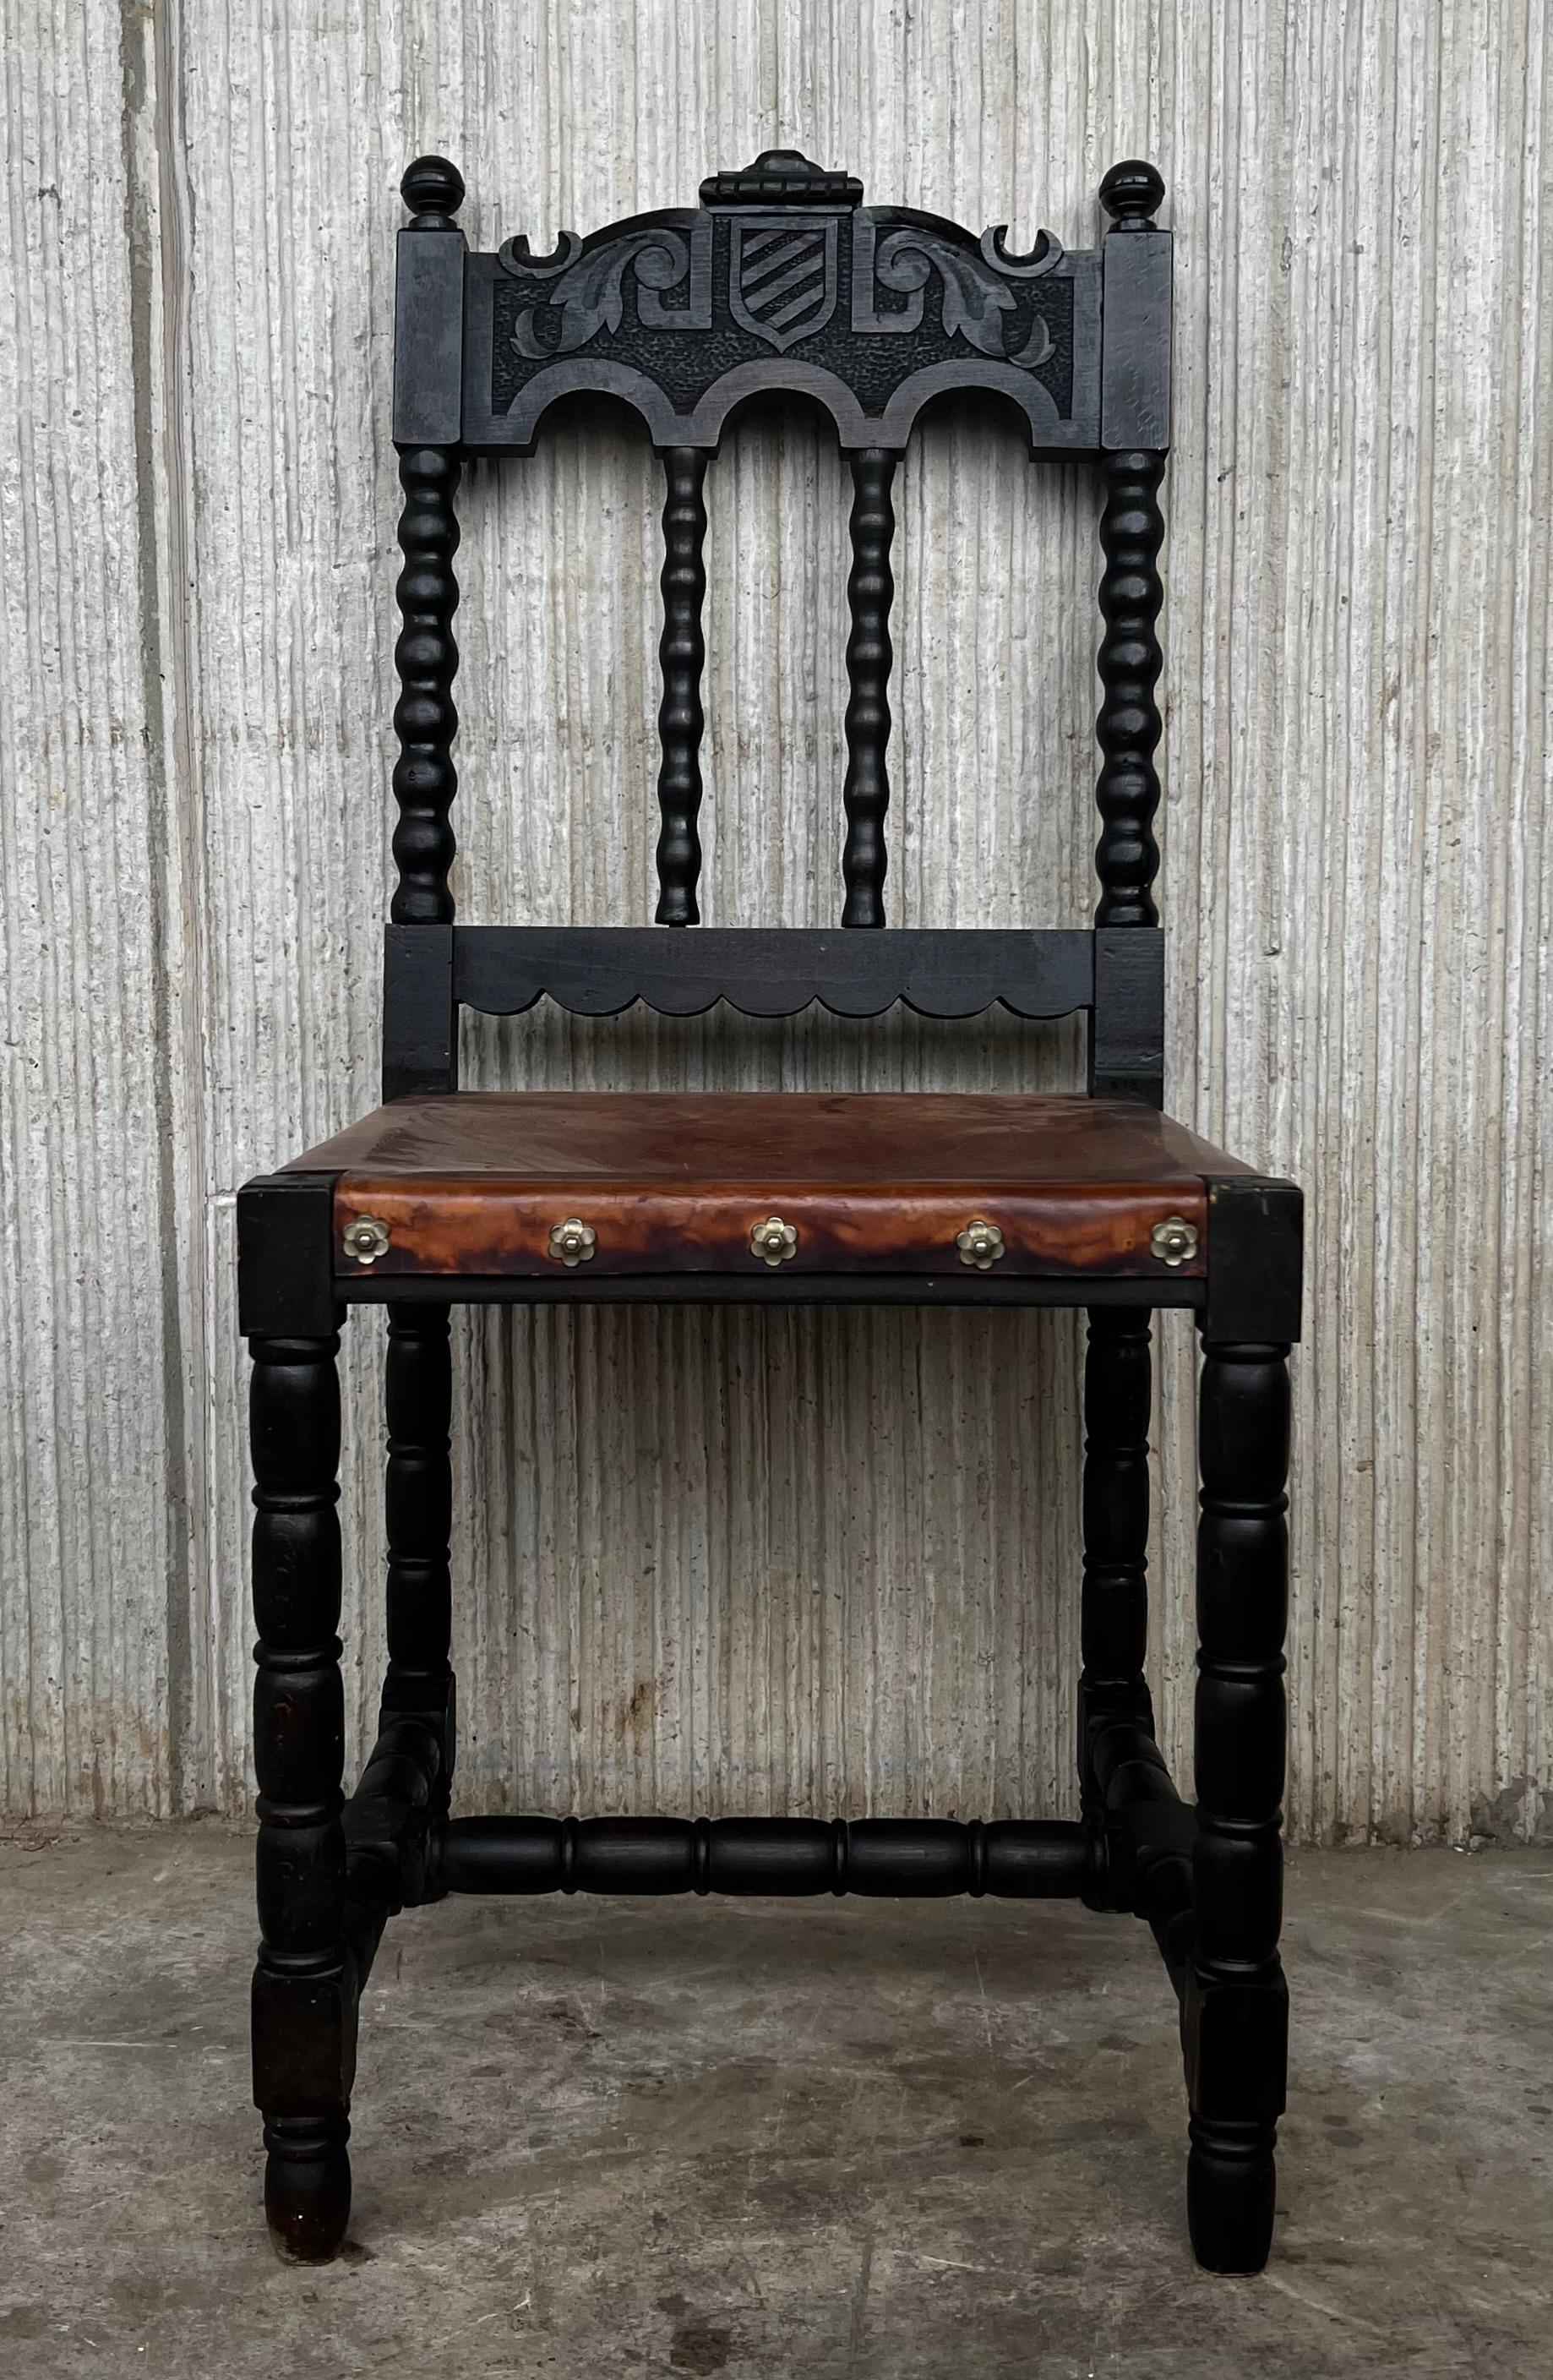 A set of 6 Spanish chairs with leather sling seatsand backs on oak and sycamore frames with hand carved decoration. These chairs are true to the Baroque Spanish character and each features carvings that employ typical Spanish elements . The leather